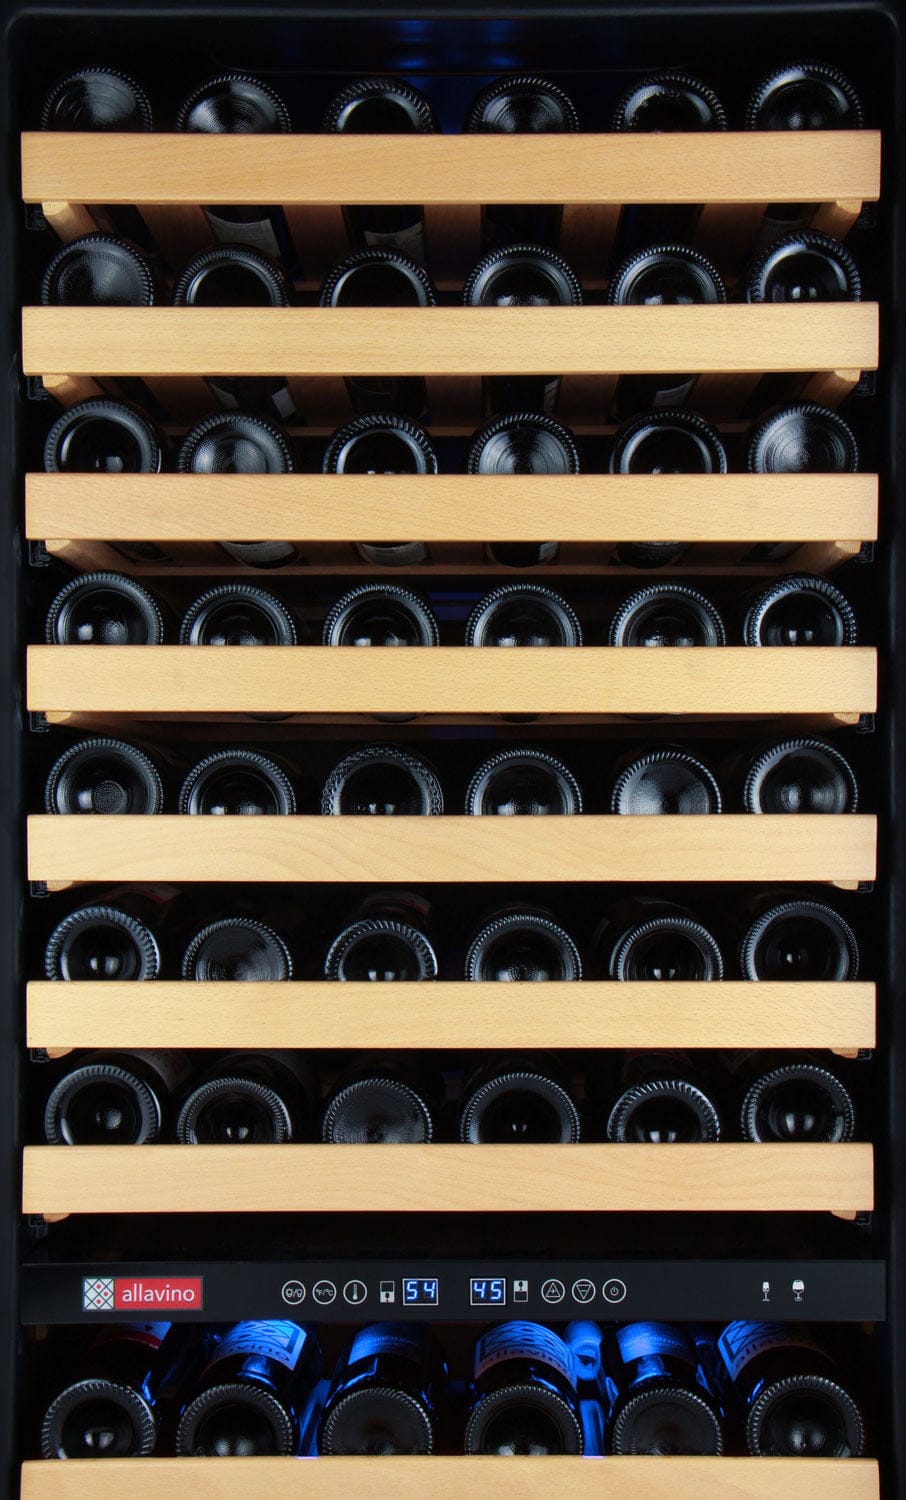 Allavino Flexcount Classic II 172 Bottle Dual Zone 24 Inch Wide Wine Cooler closeup front view of full cooler.